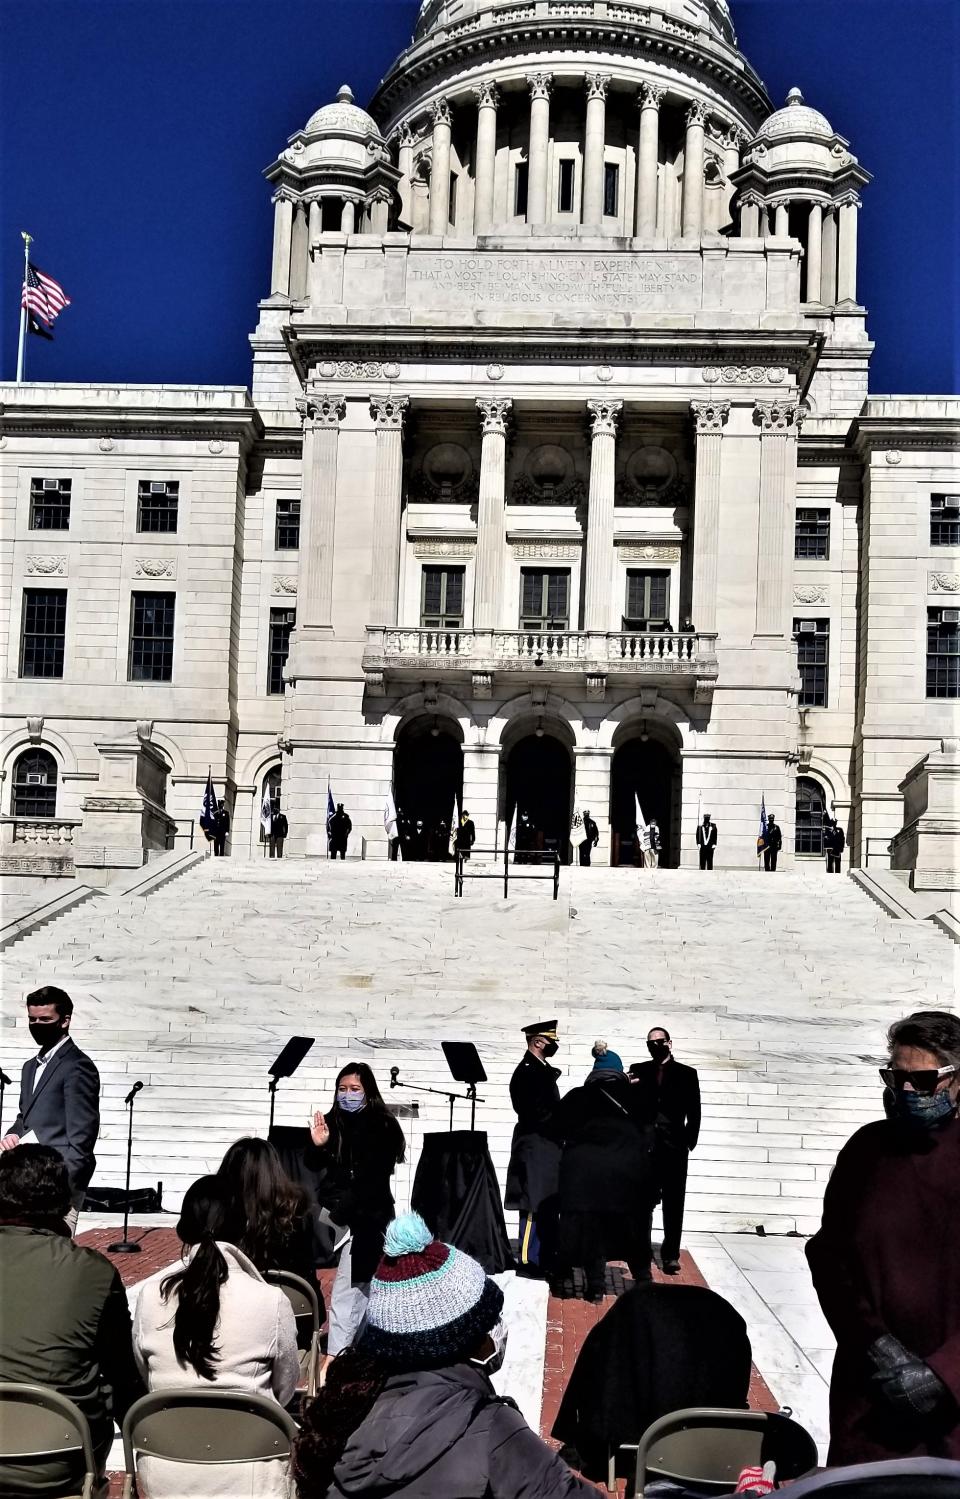 The south steps of the State House minutes before the ceremonial inauguration of Gov. Dan McKee began in March 2021.